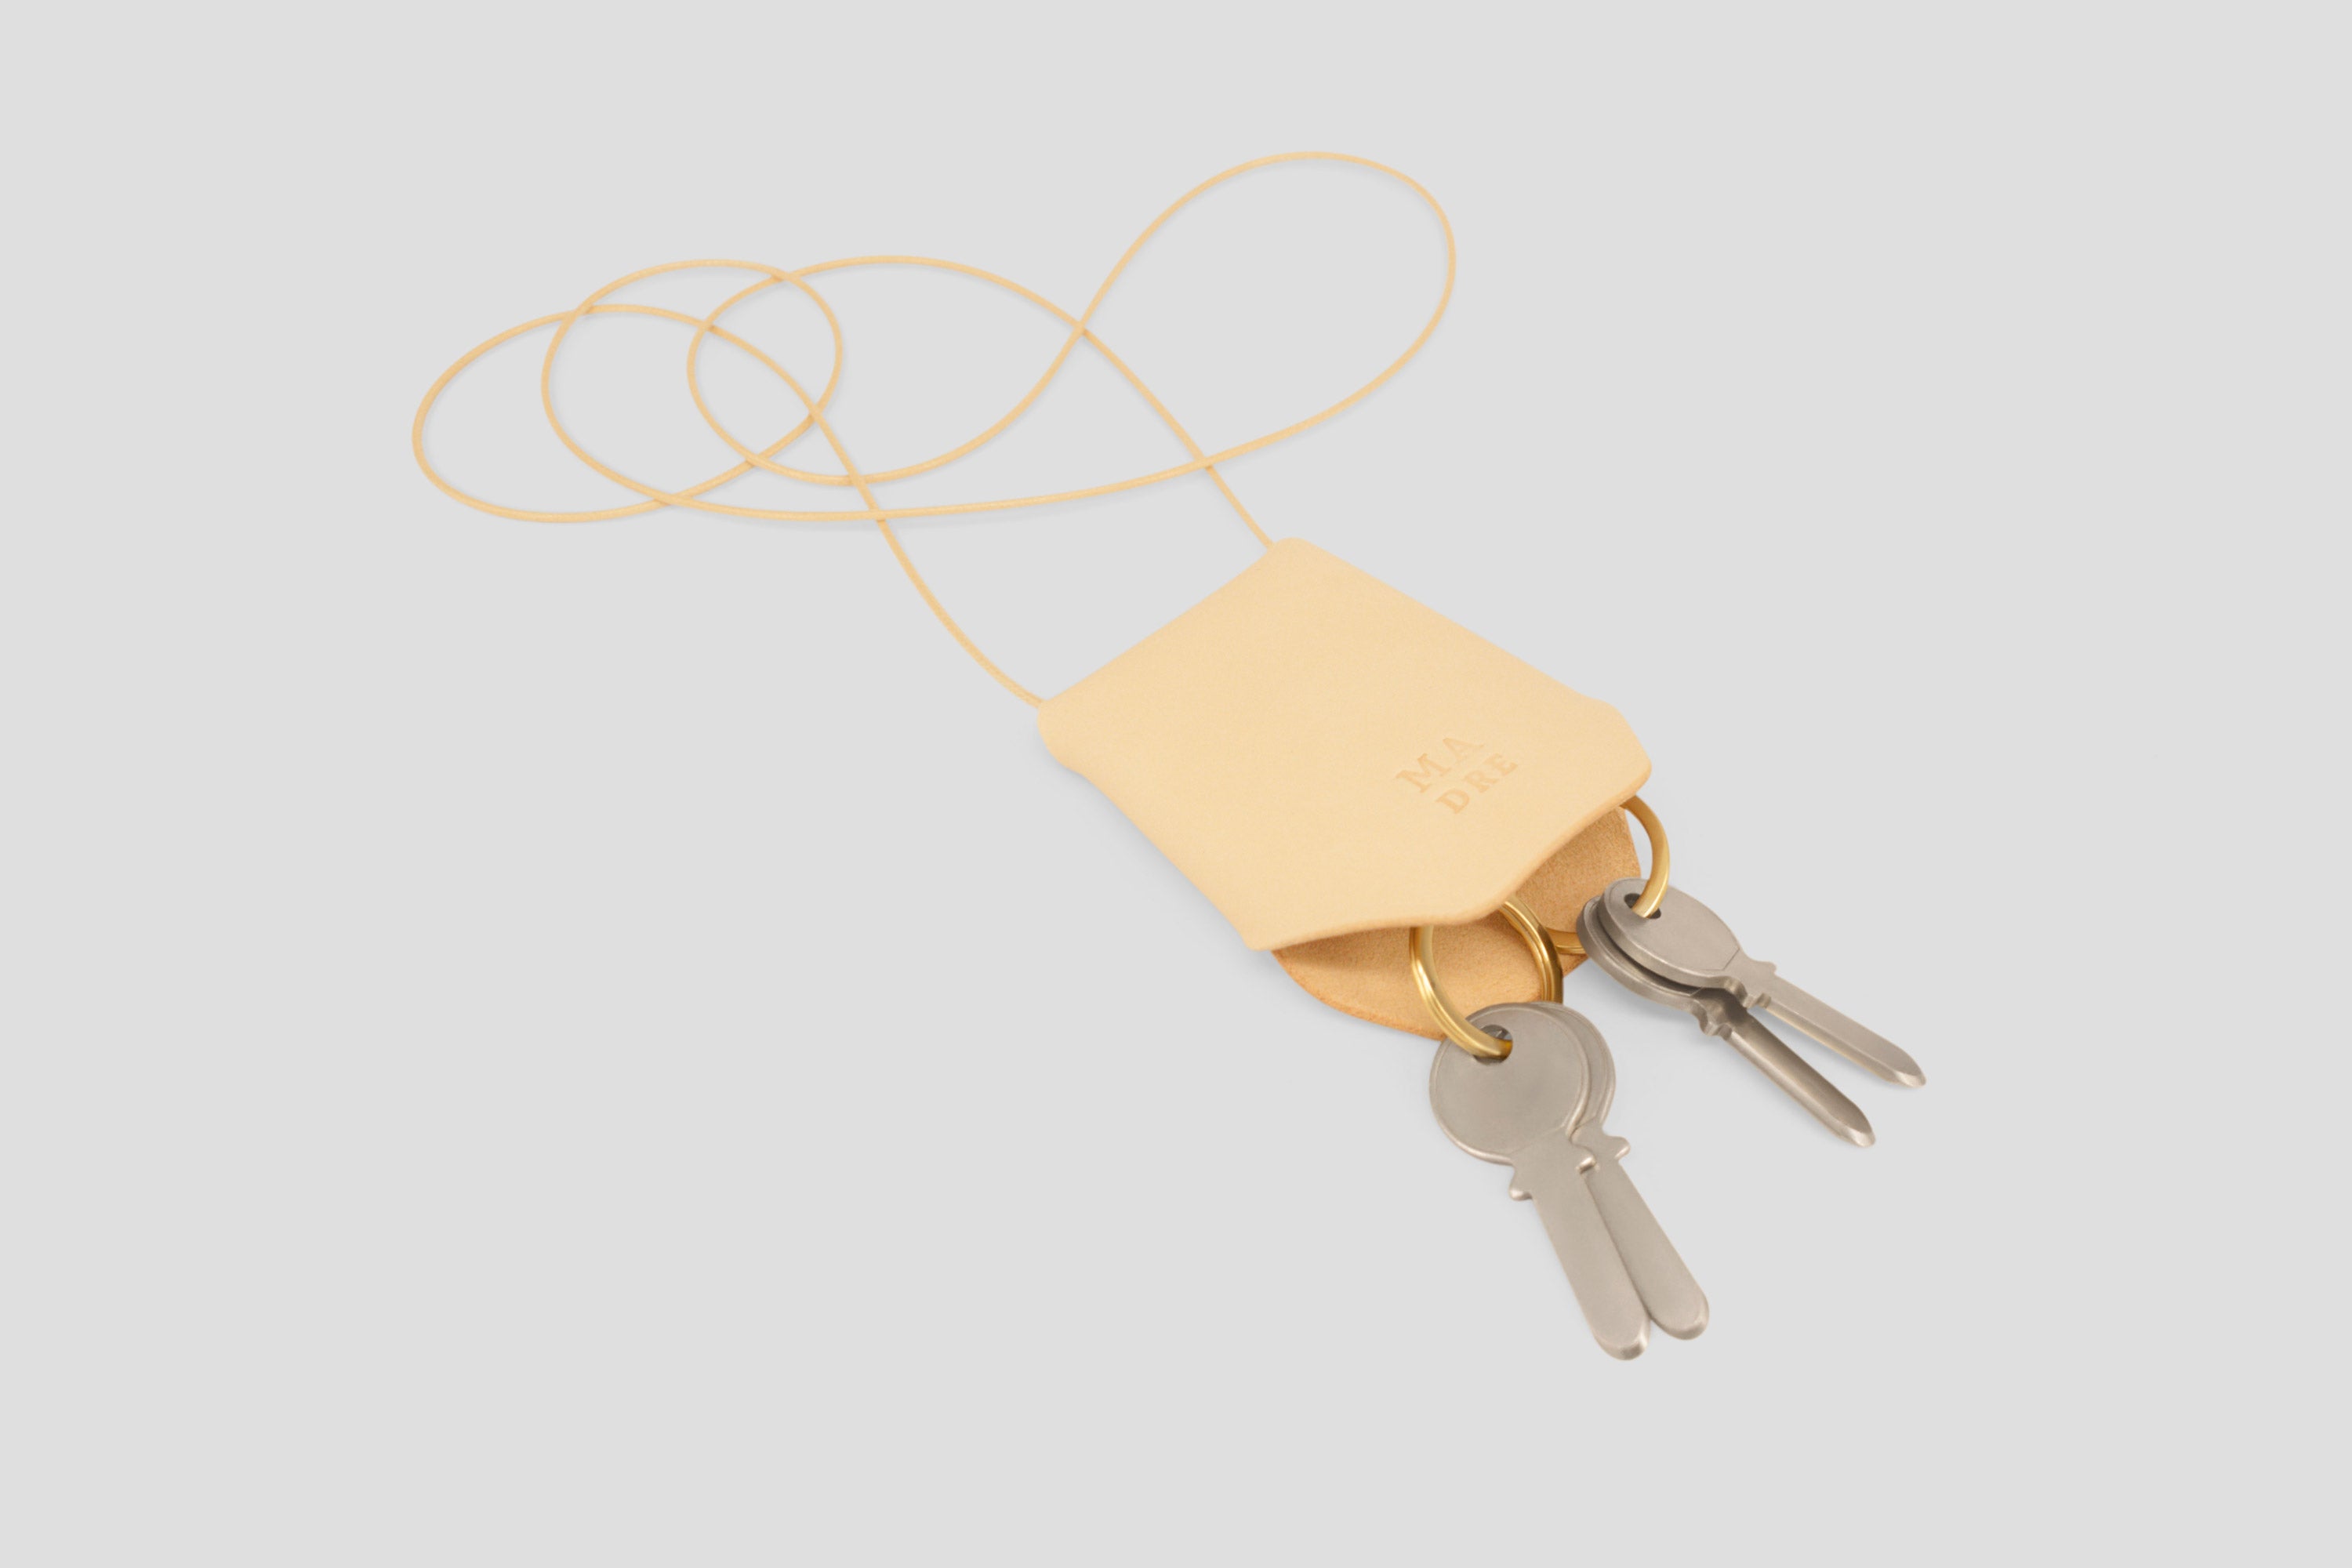 Keyhanger natural color pouch leather clochette made out of vegetable tanned leather designed by atelier madre manuel dreesmann barcelona